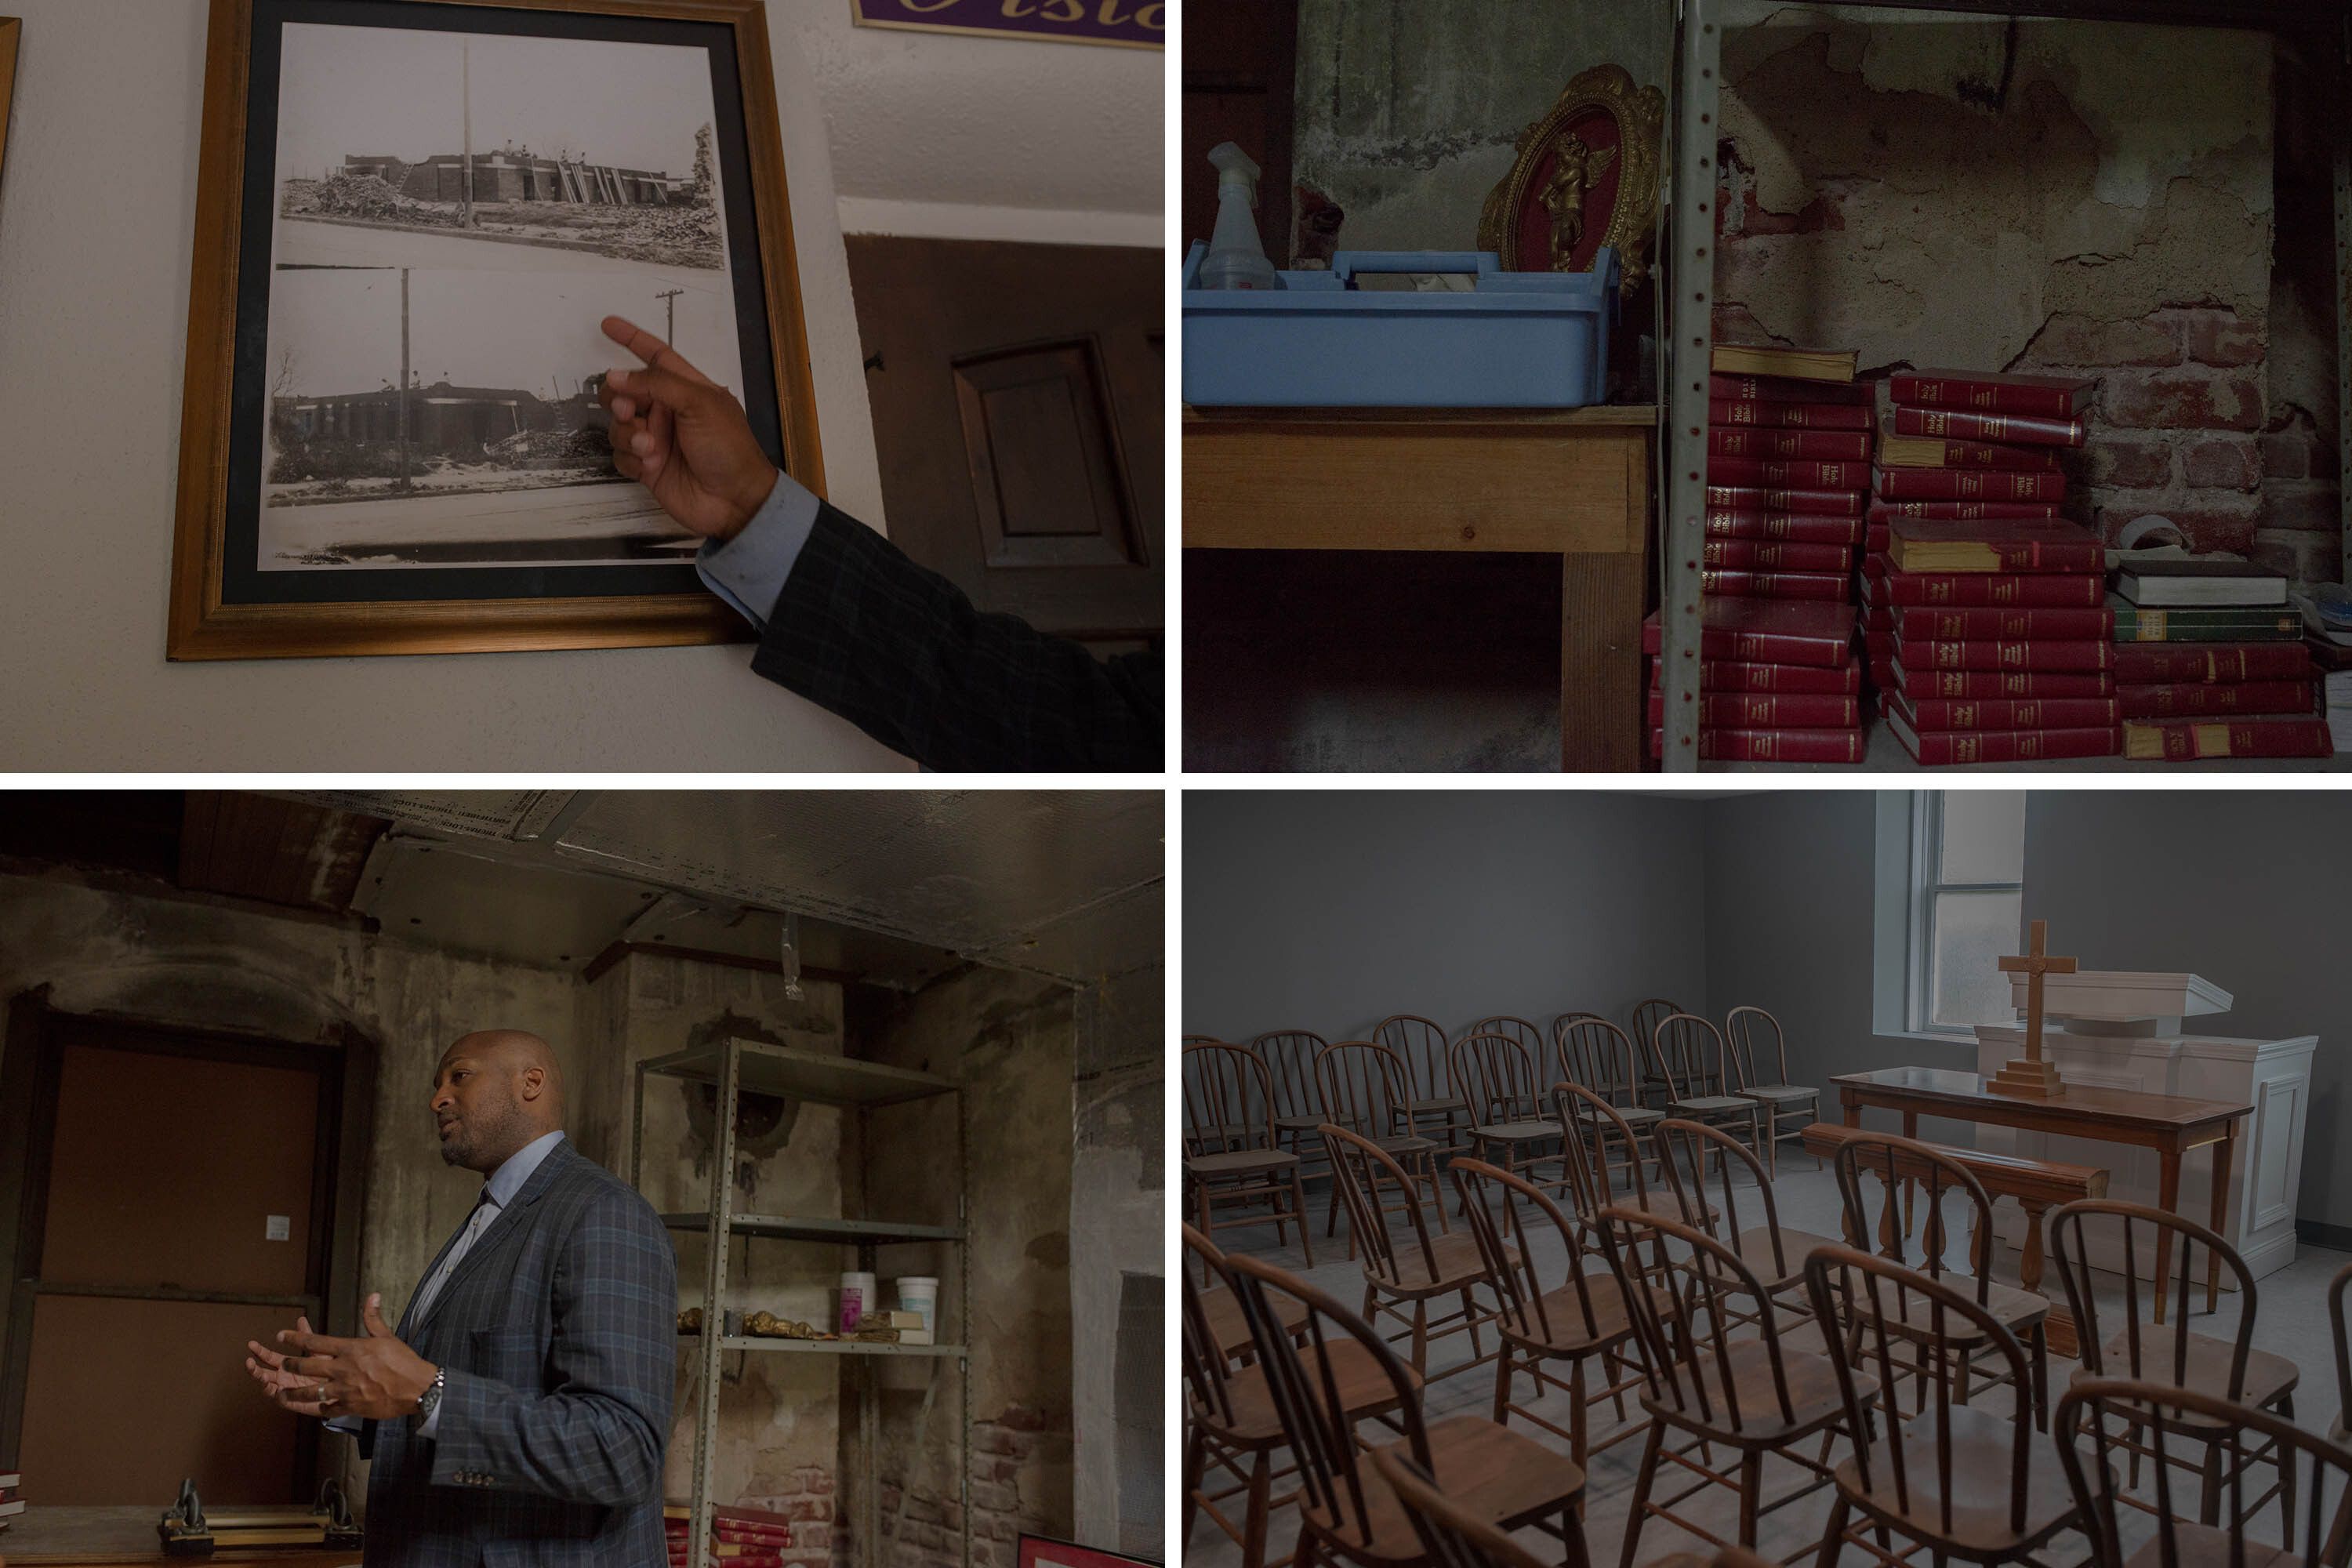 Top left: Turner points to photos of the destroyed buildings of Greenwood and their rebuilding. These framed images sit inside the rebuilt Vernon AME Church. Top right: Brick from before the church was burned is exposed in the basement. It is said that people took shelter in this basement while the city was burning around them and the brick protected them. Bottom left: Turner in the basement of the church. Bottom right: Chairs sit in the basement where services were held while the church was being rebuilt.